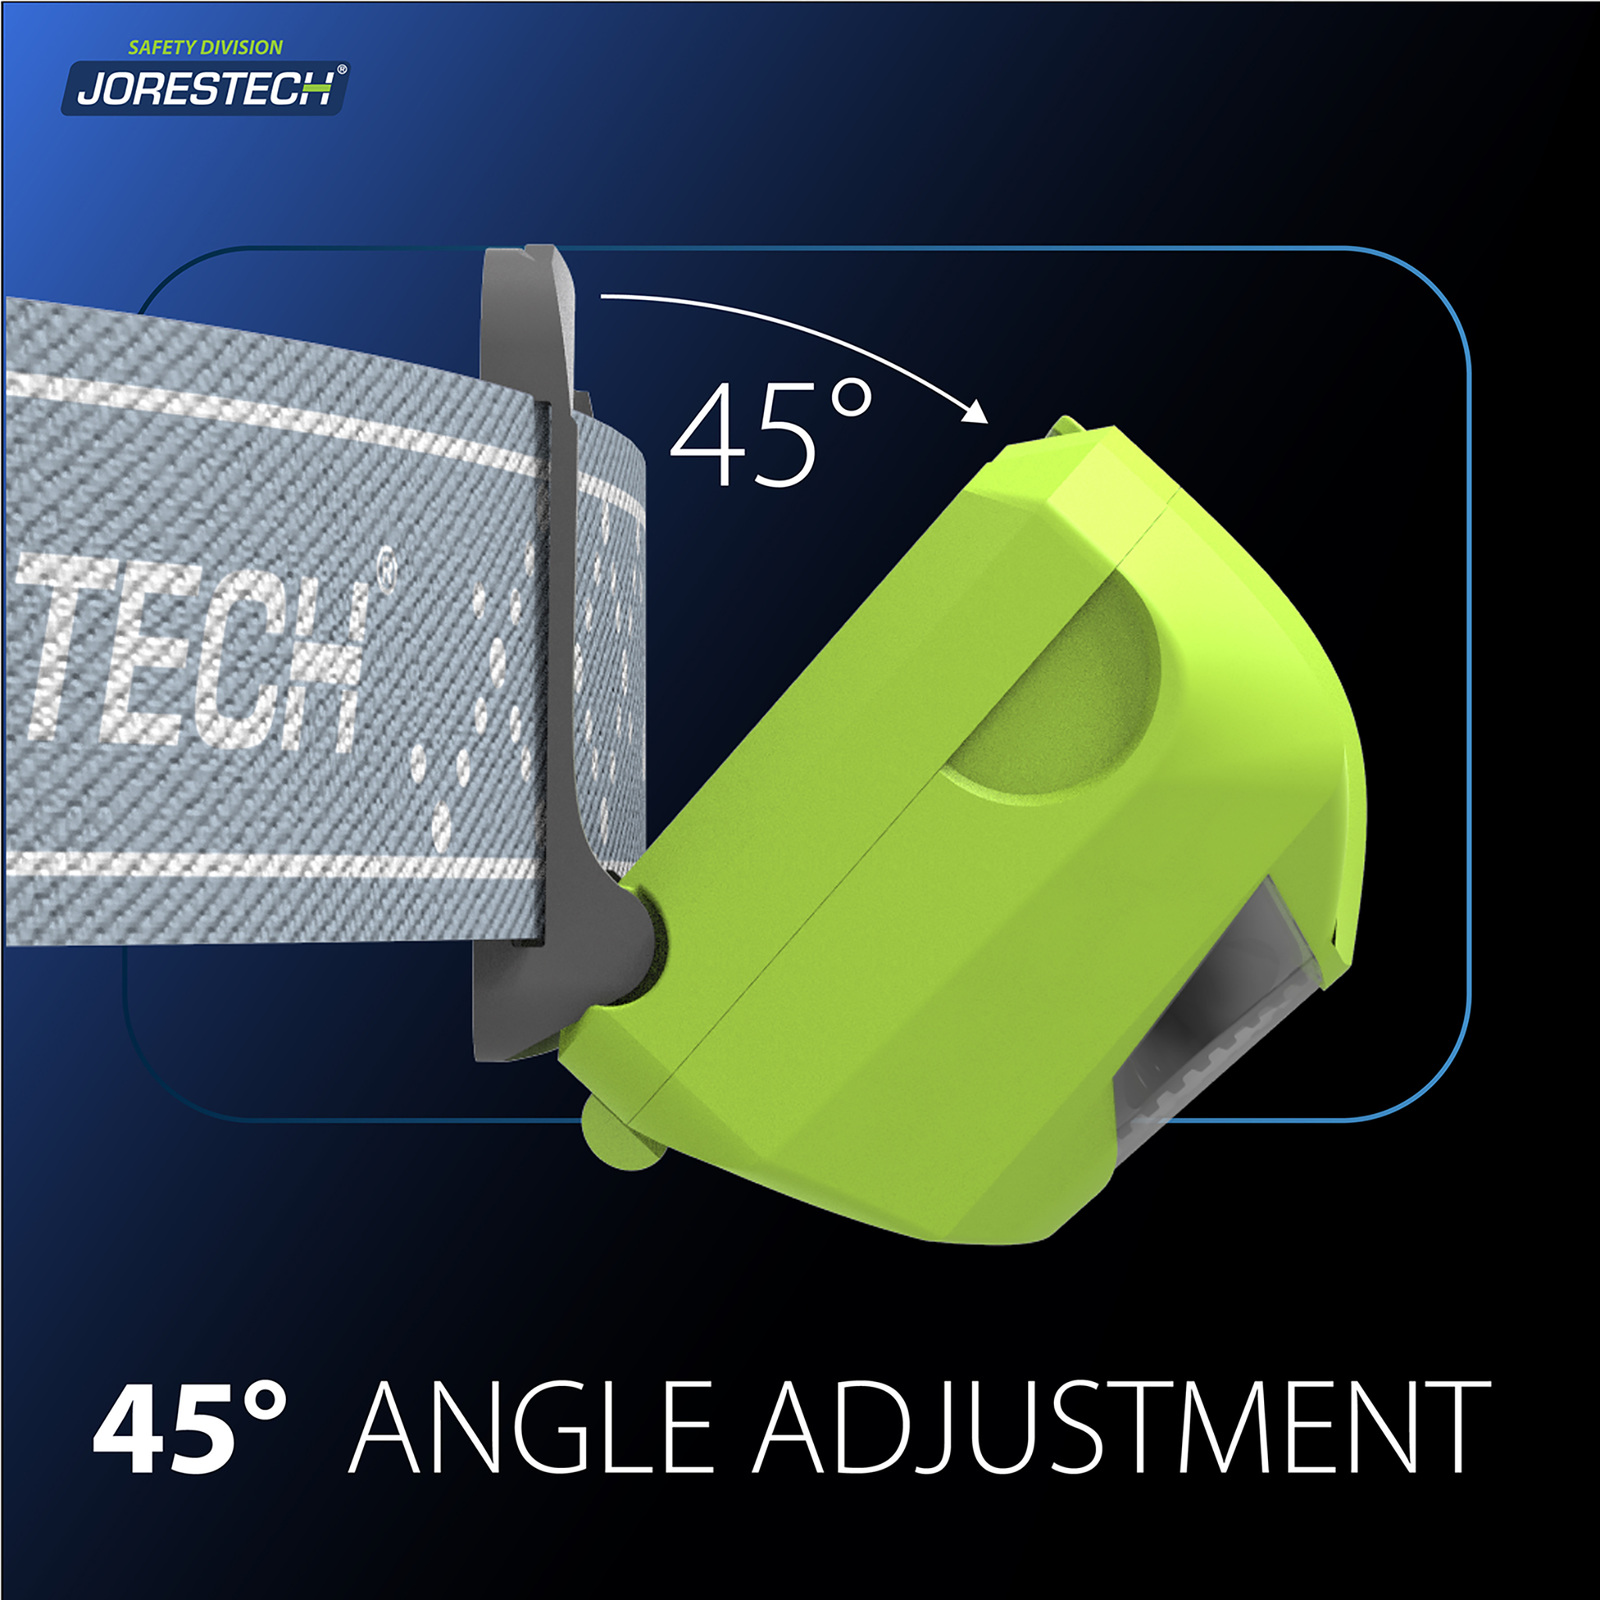 Show the JORESTECH® head lamp tilted 45 degrees for angle adjustment.